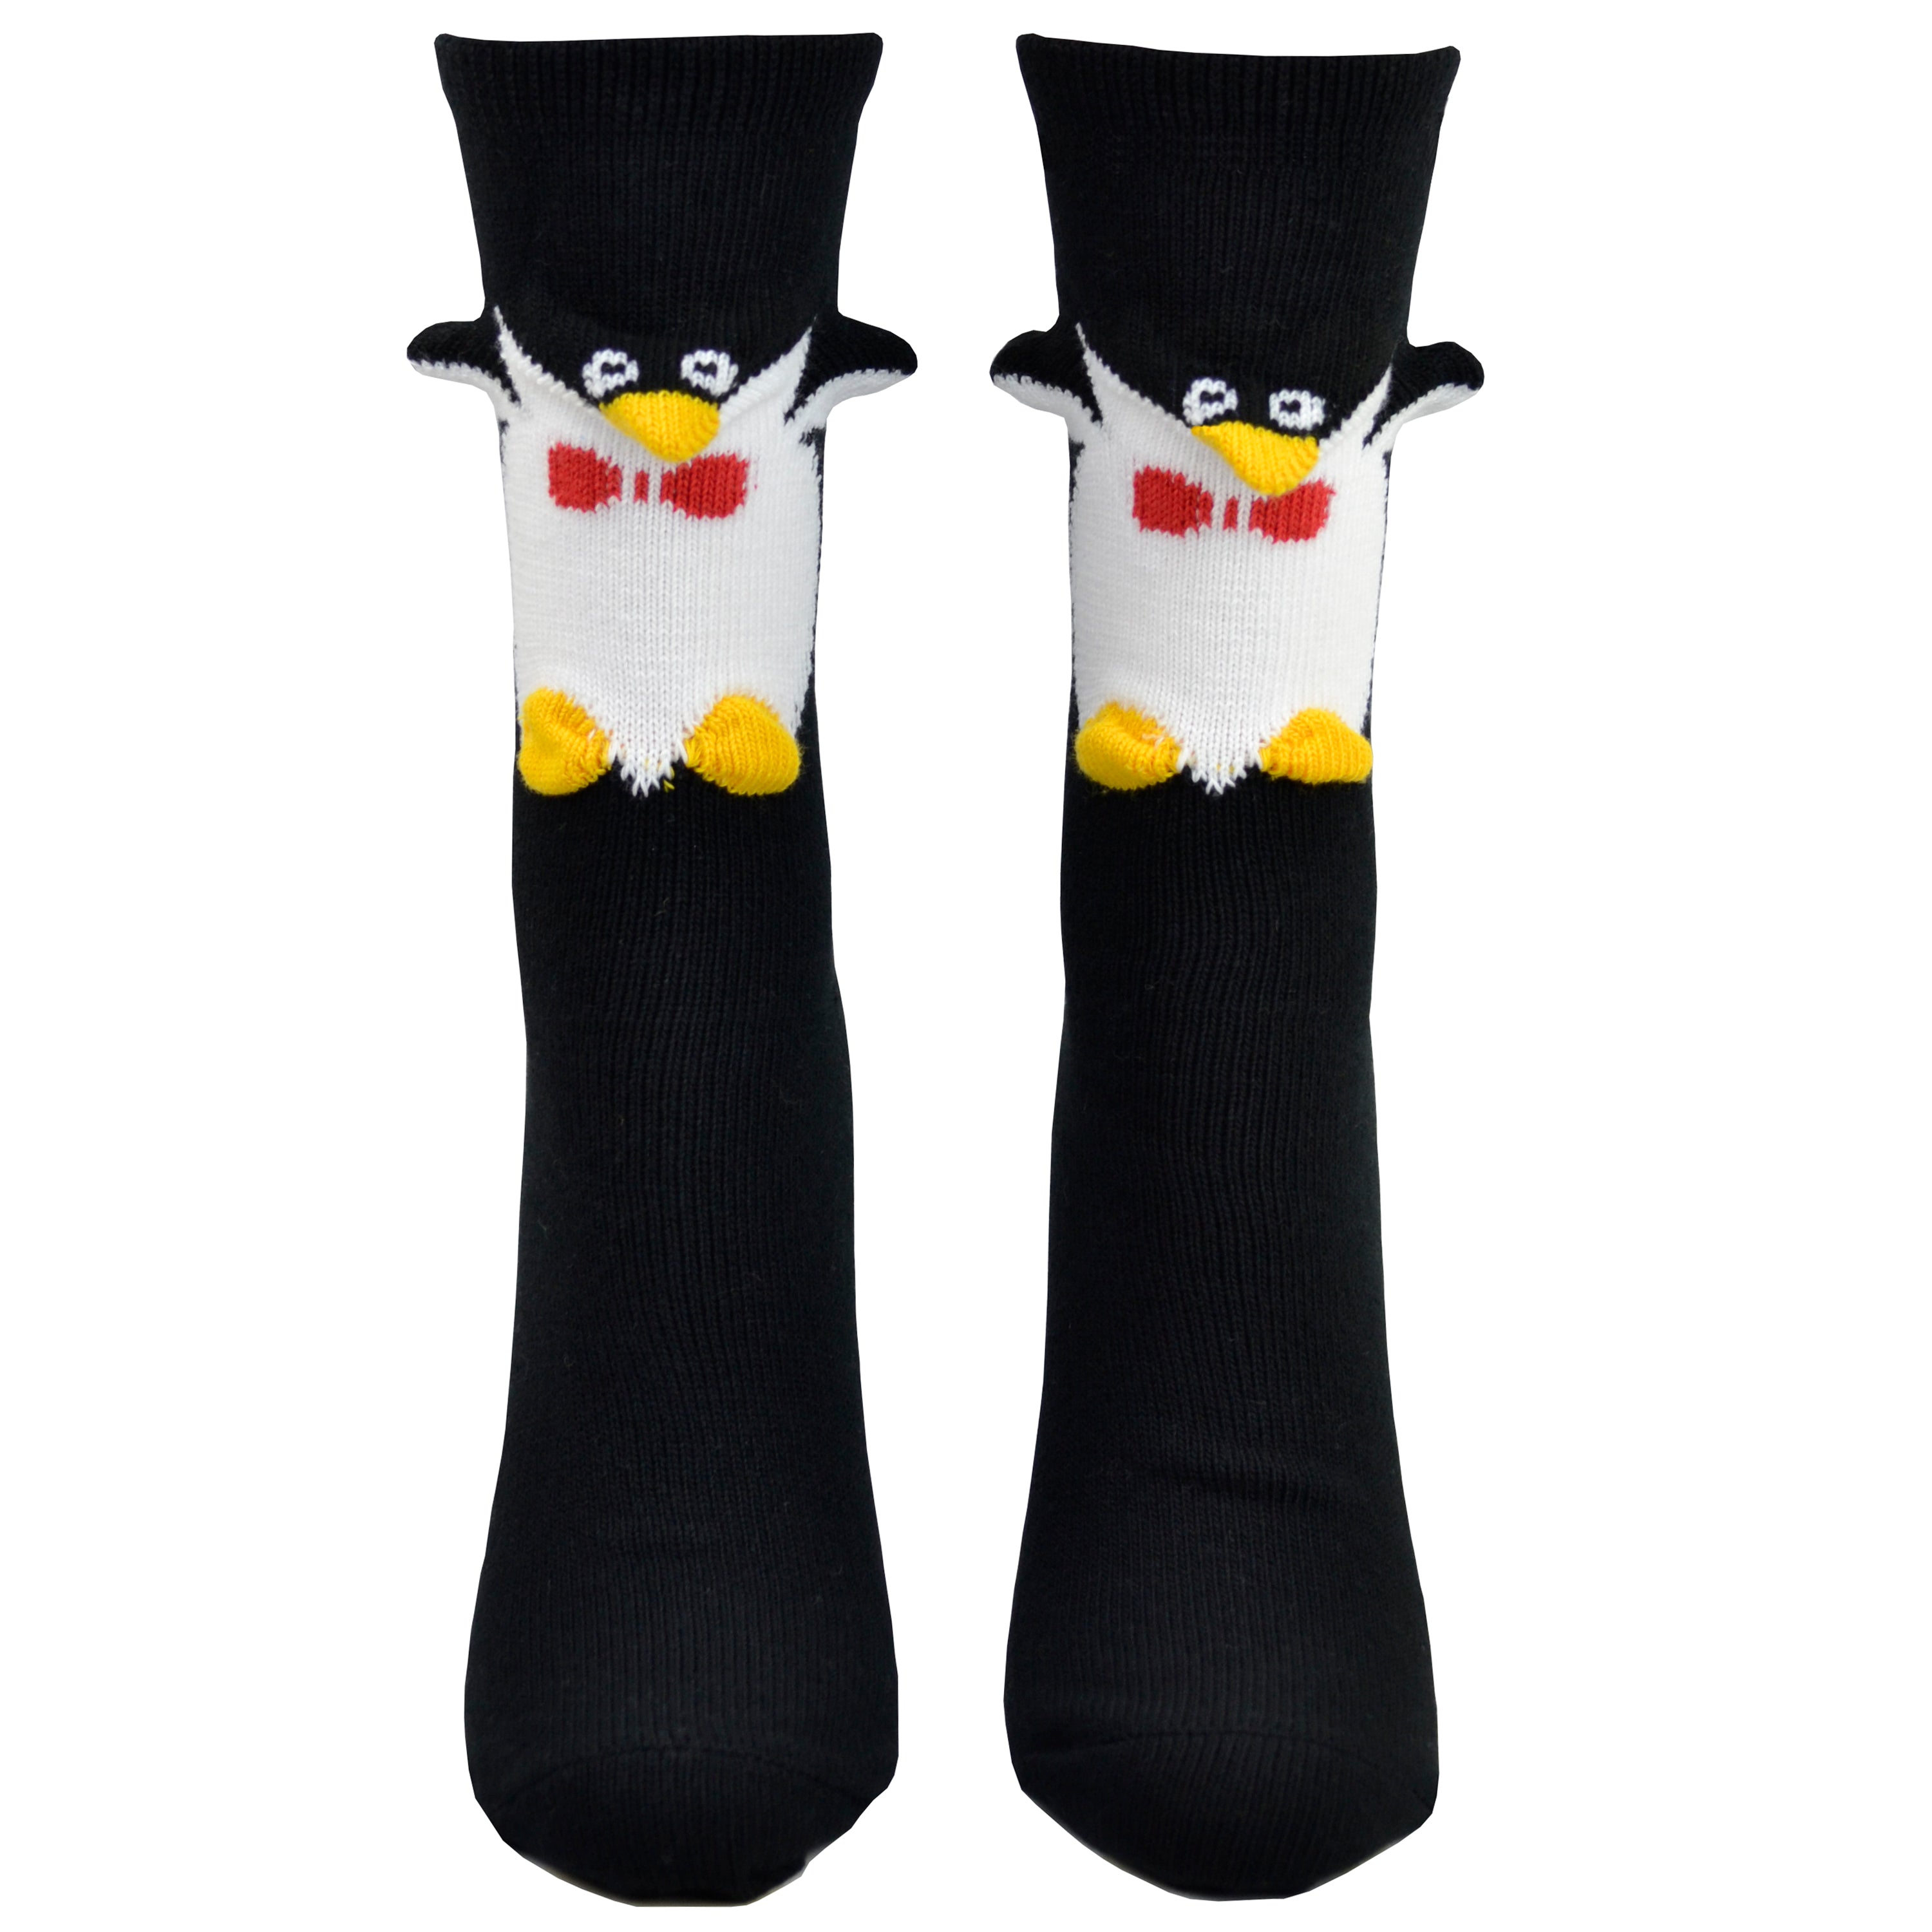 Shown on a foot mold from a different angle, a pair of Foot Traffic, black and white cotton women's crew socks with three dimensional pattern of cute penguin